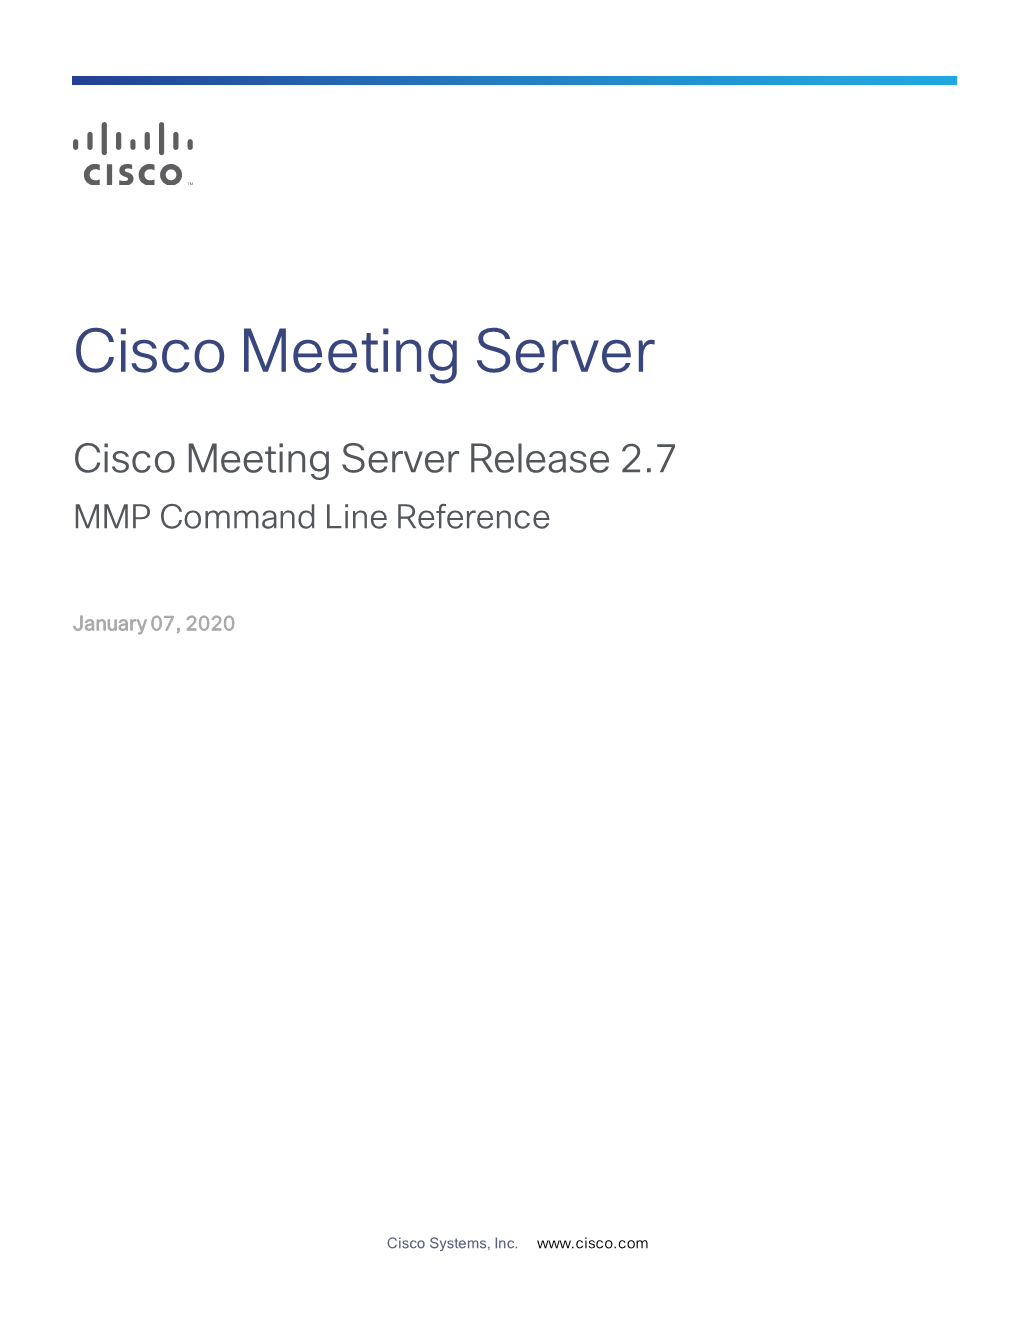 Cisco Meeting Server Release 2.7 MMP Command Line Reference